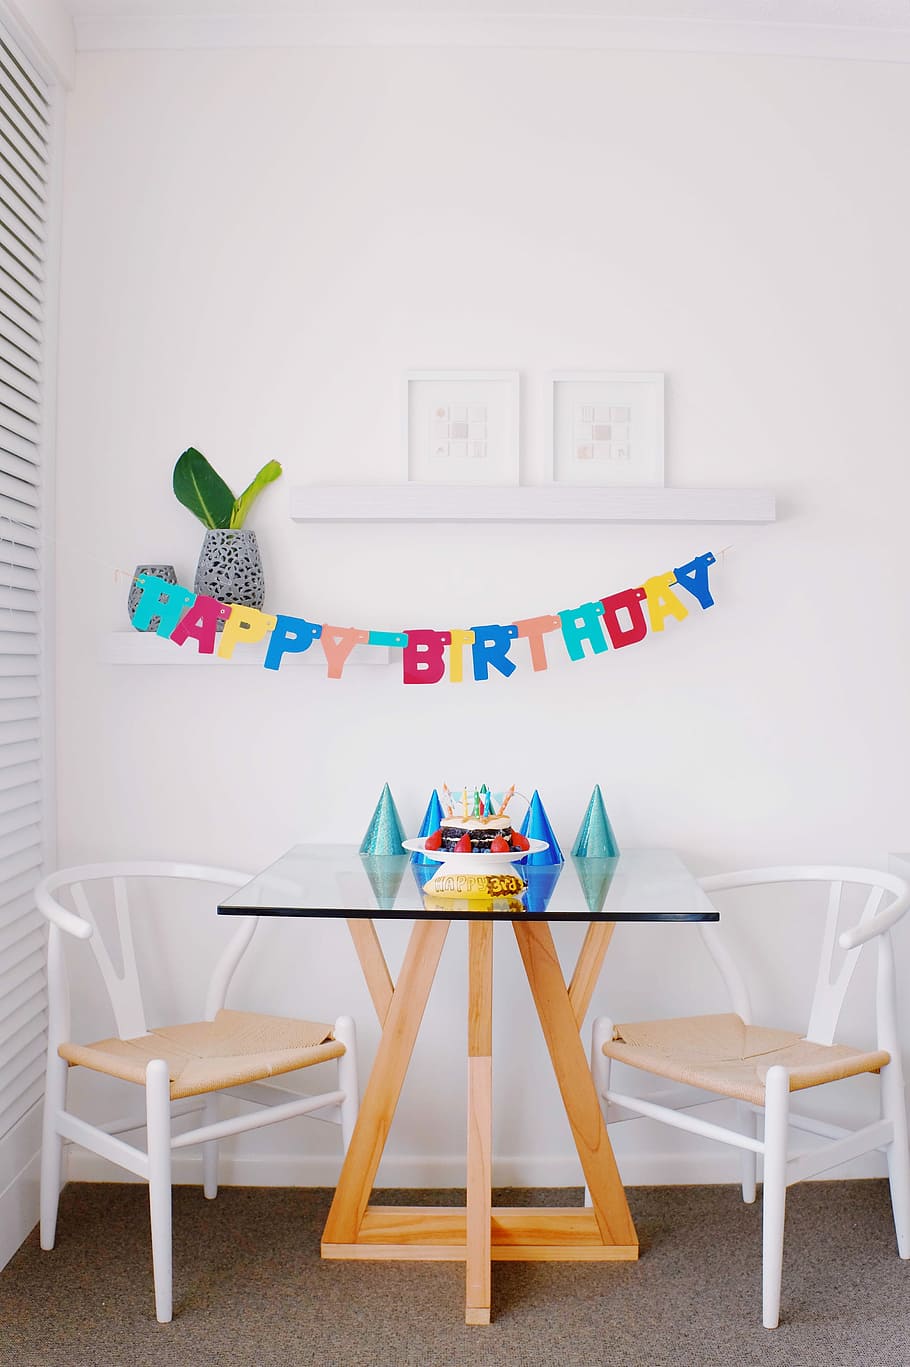 brown and white pub set and happy birthday hanging decor inside room, multicolored Happy Birthday banner on white painted wall, HD wallpaper